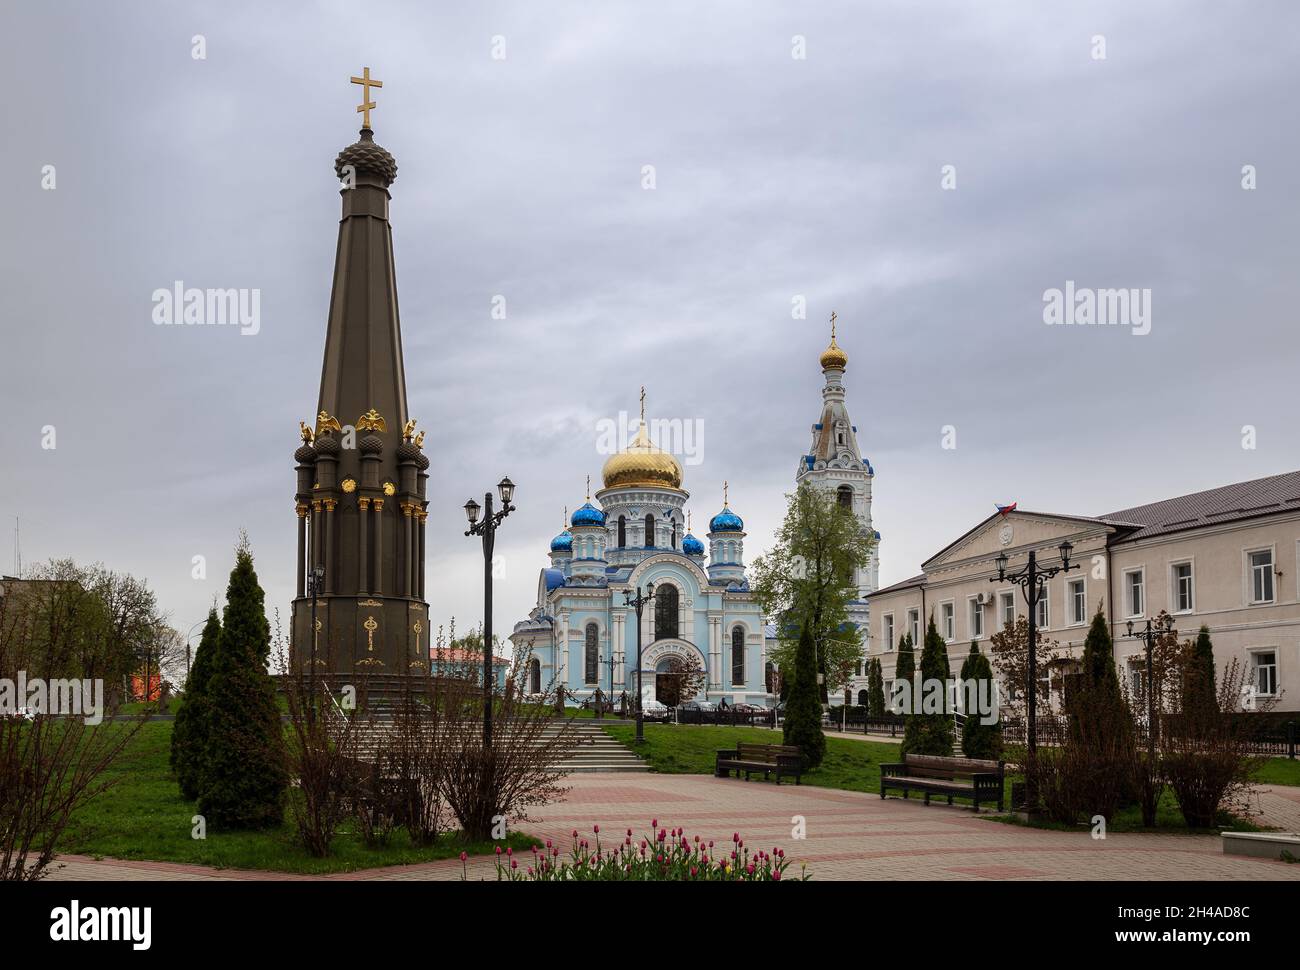 Central square of the town of Maloyaroslavets. Monument to the memory of the heroes of the war of 1812 and the Assumption Cathedral. Kaluga region, Ru Stock Photo